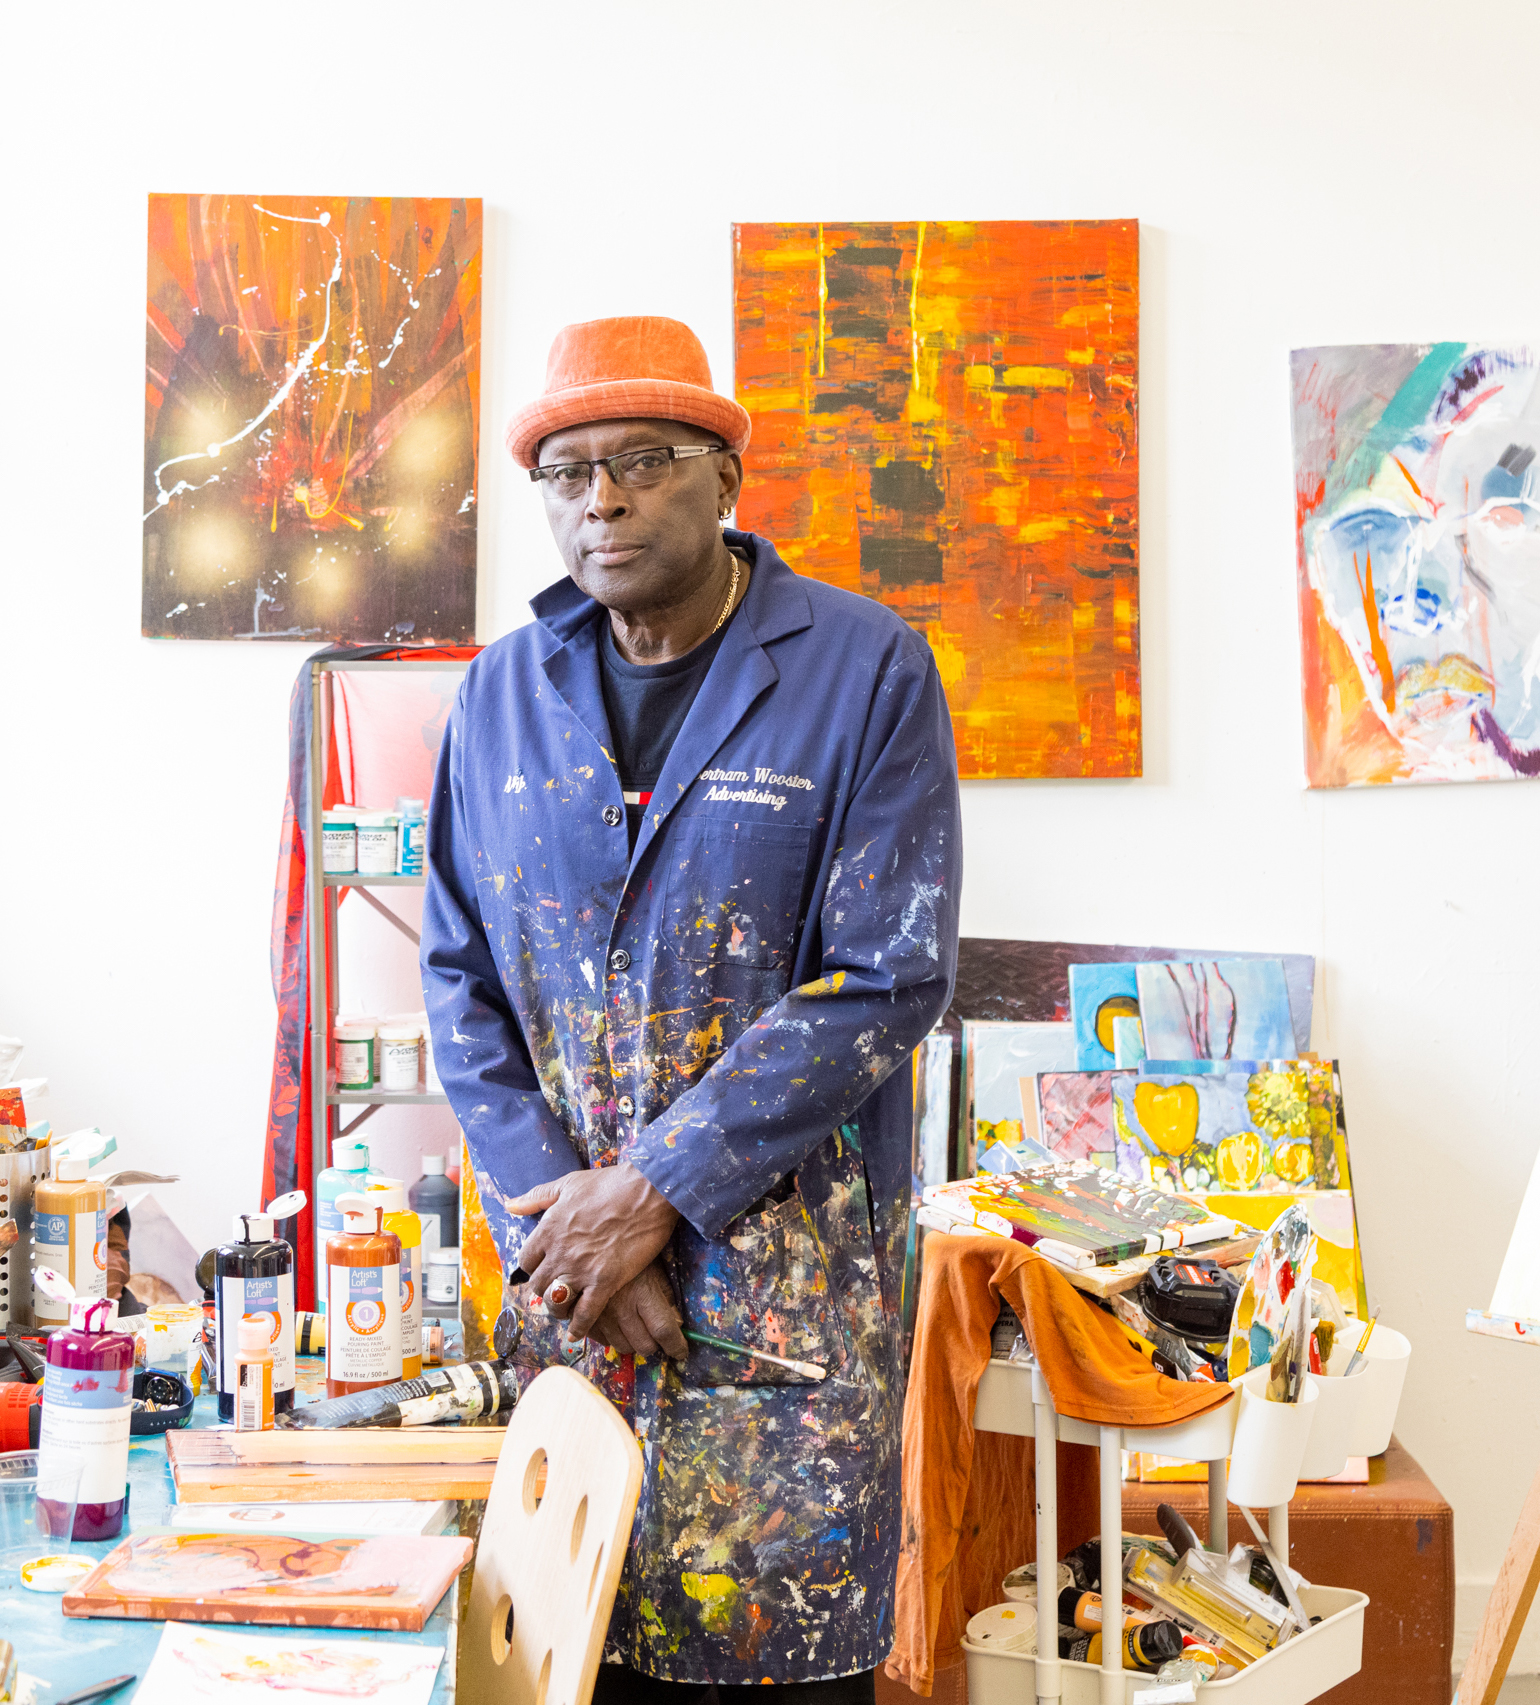 An artist in a paint-splattered coat stands in a studio surrounded by vibrant paintings and art supplies.